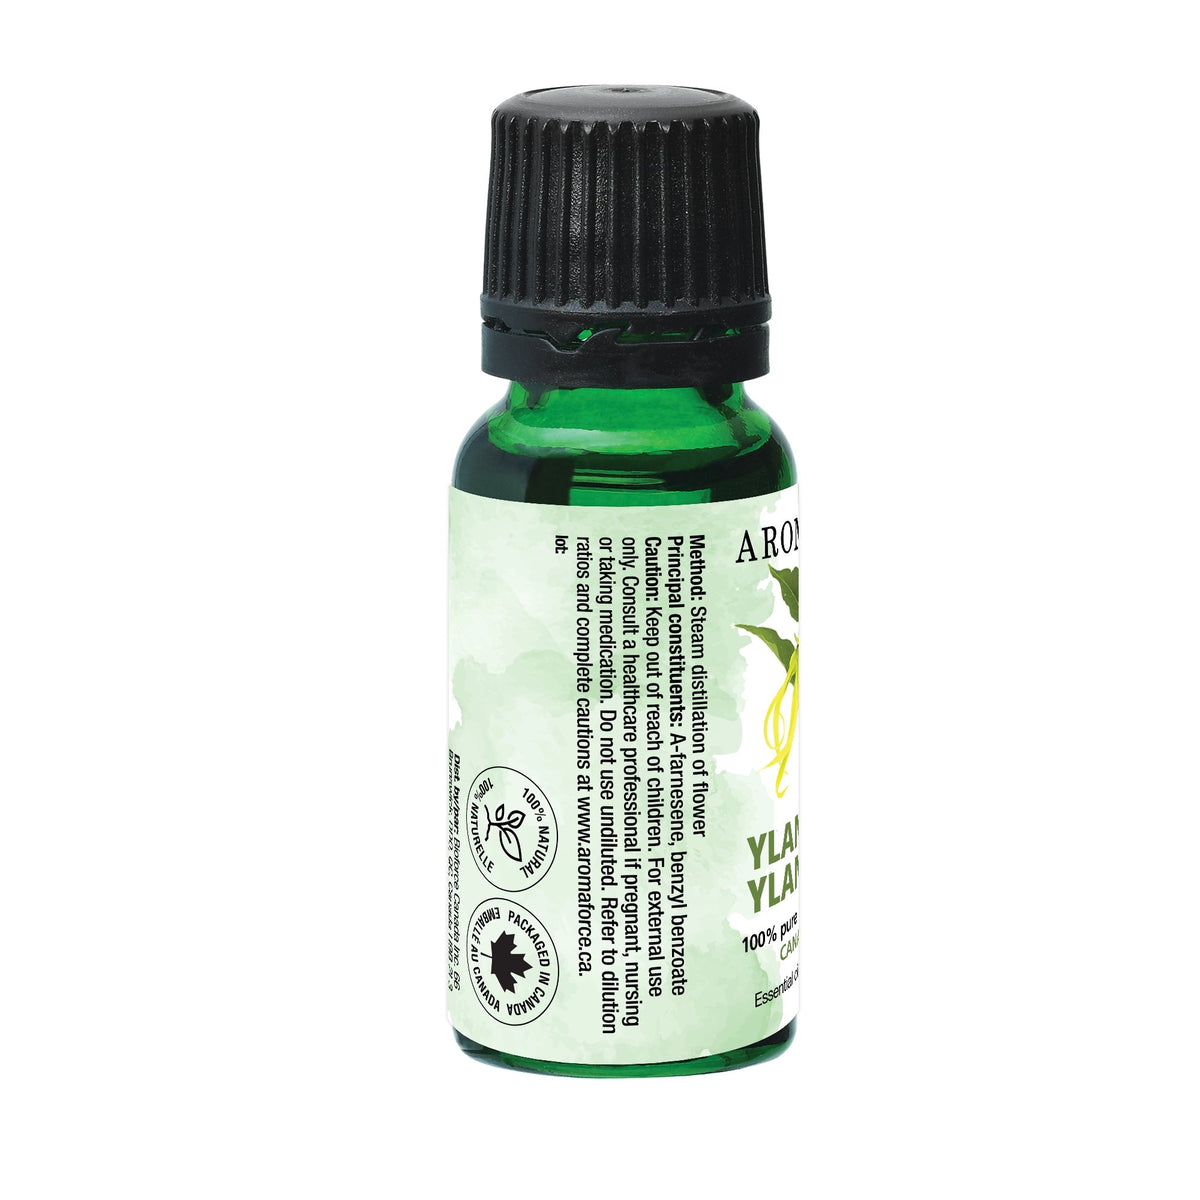 Aromaforce Ylang ylang Essential Oil 15mL - A.Vogel Canada